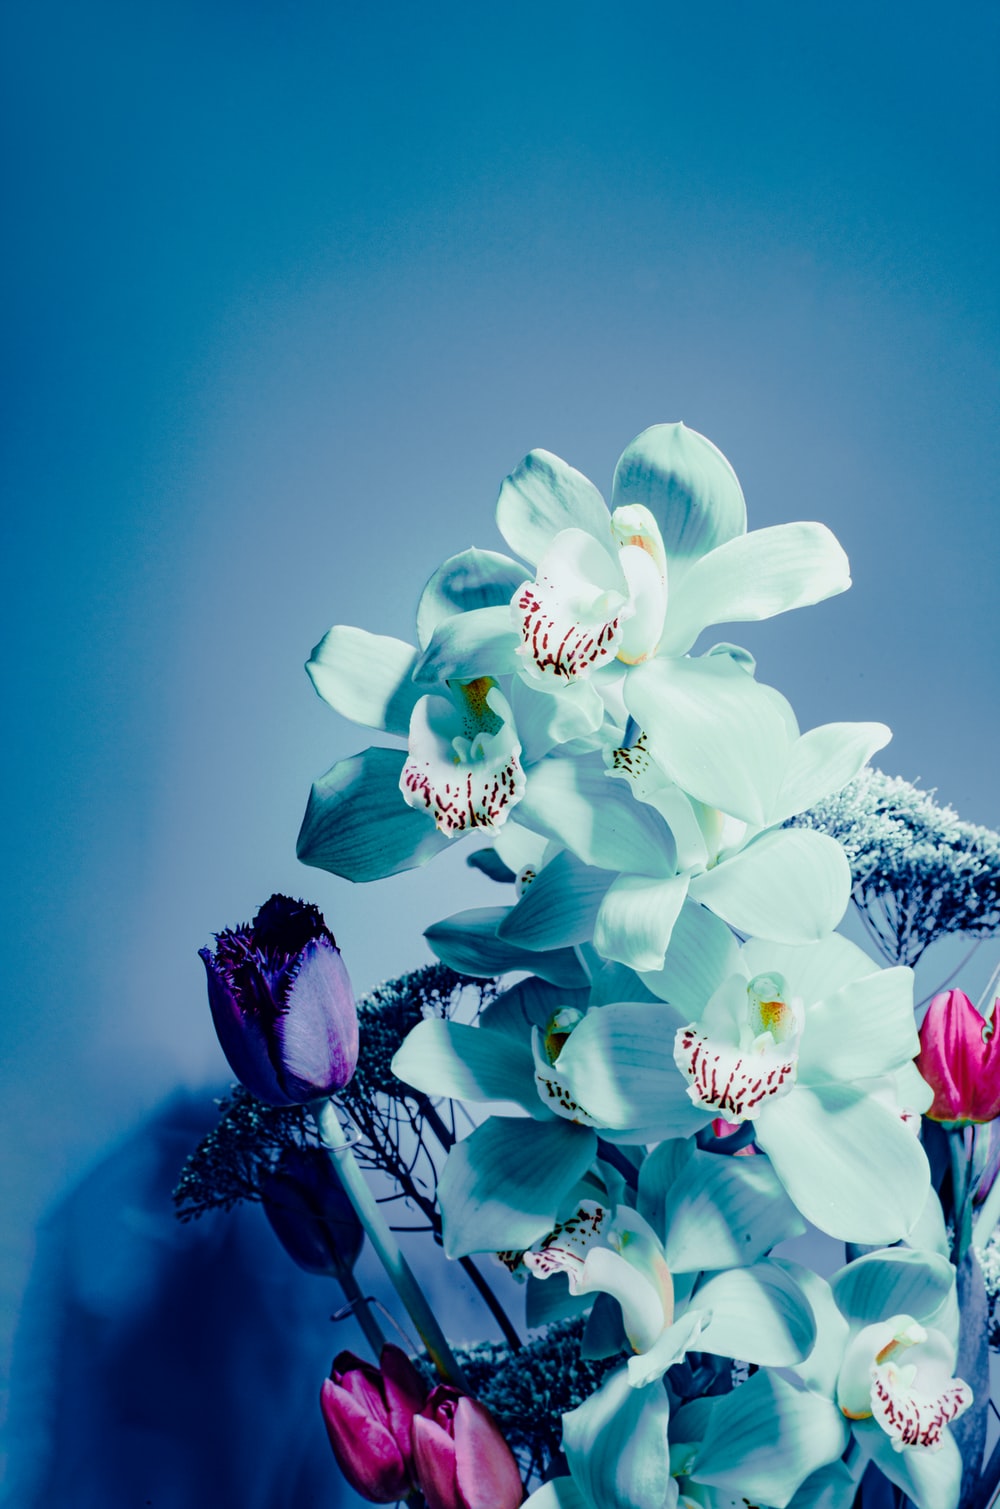 Blue Orchid Picture. Download Free Image